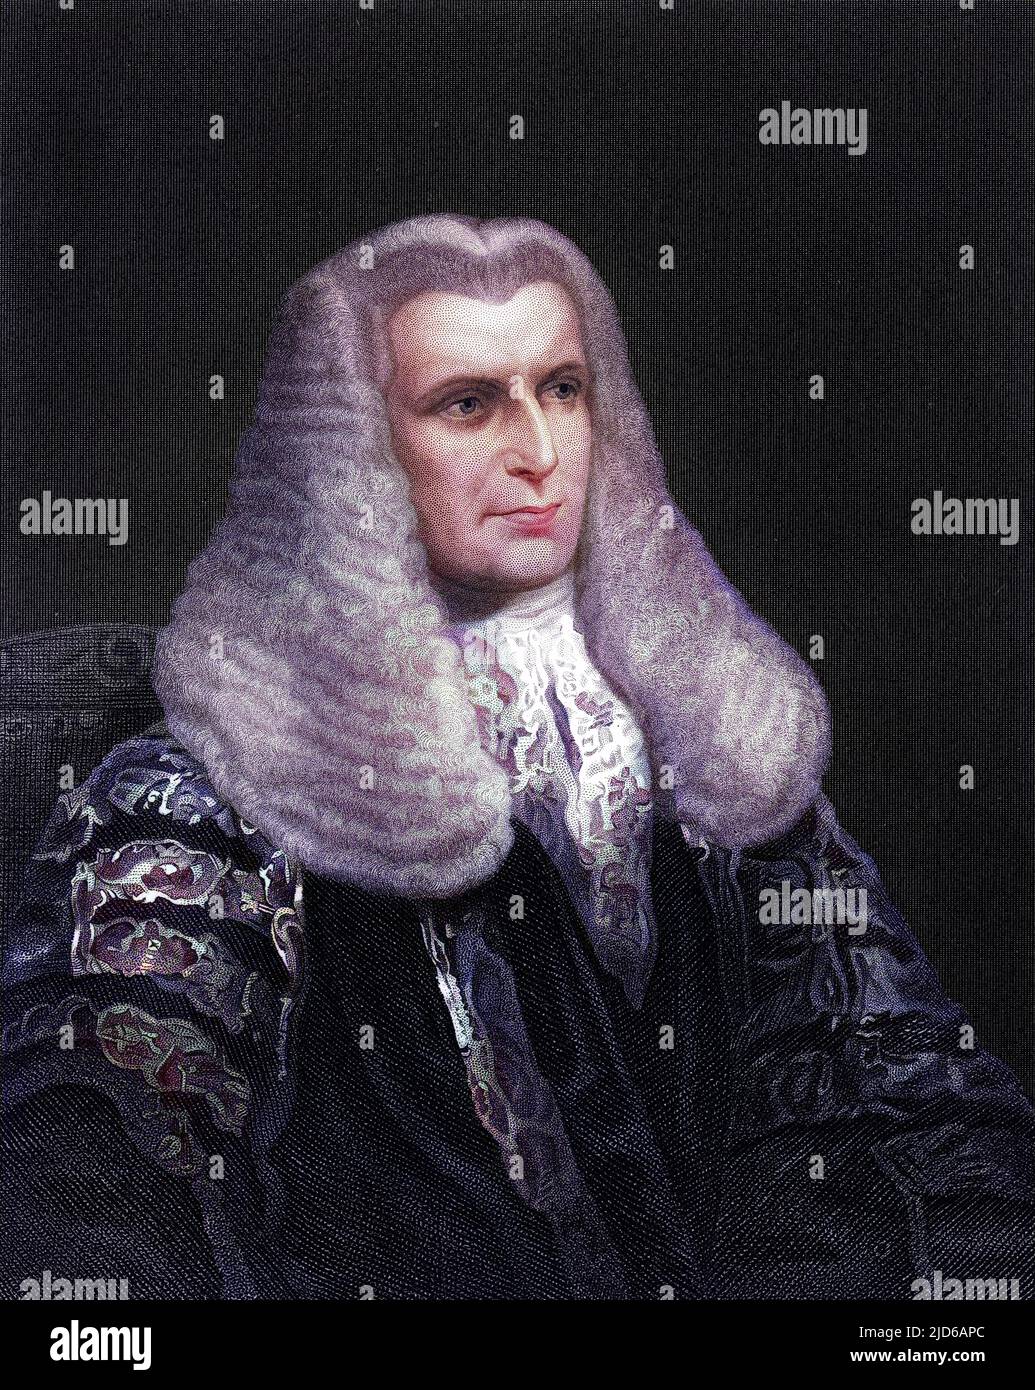 JOHN SINGLETON COPLEY, first baron LYNDHURST Statesman, lord chancellor in his robes. Colourised version of : 10163885       Date: 1772 - 1863 Stock Photo